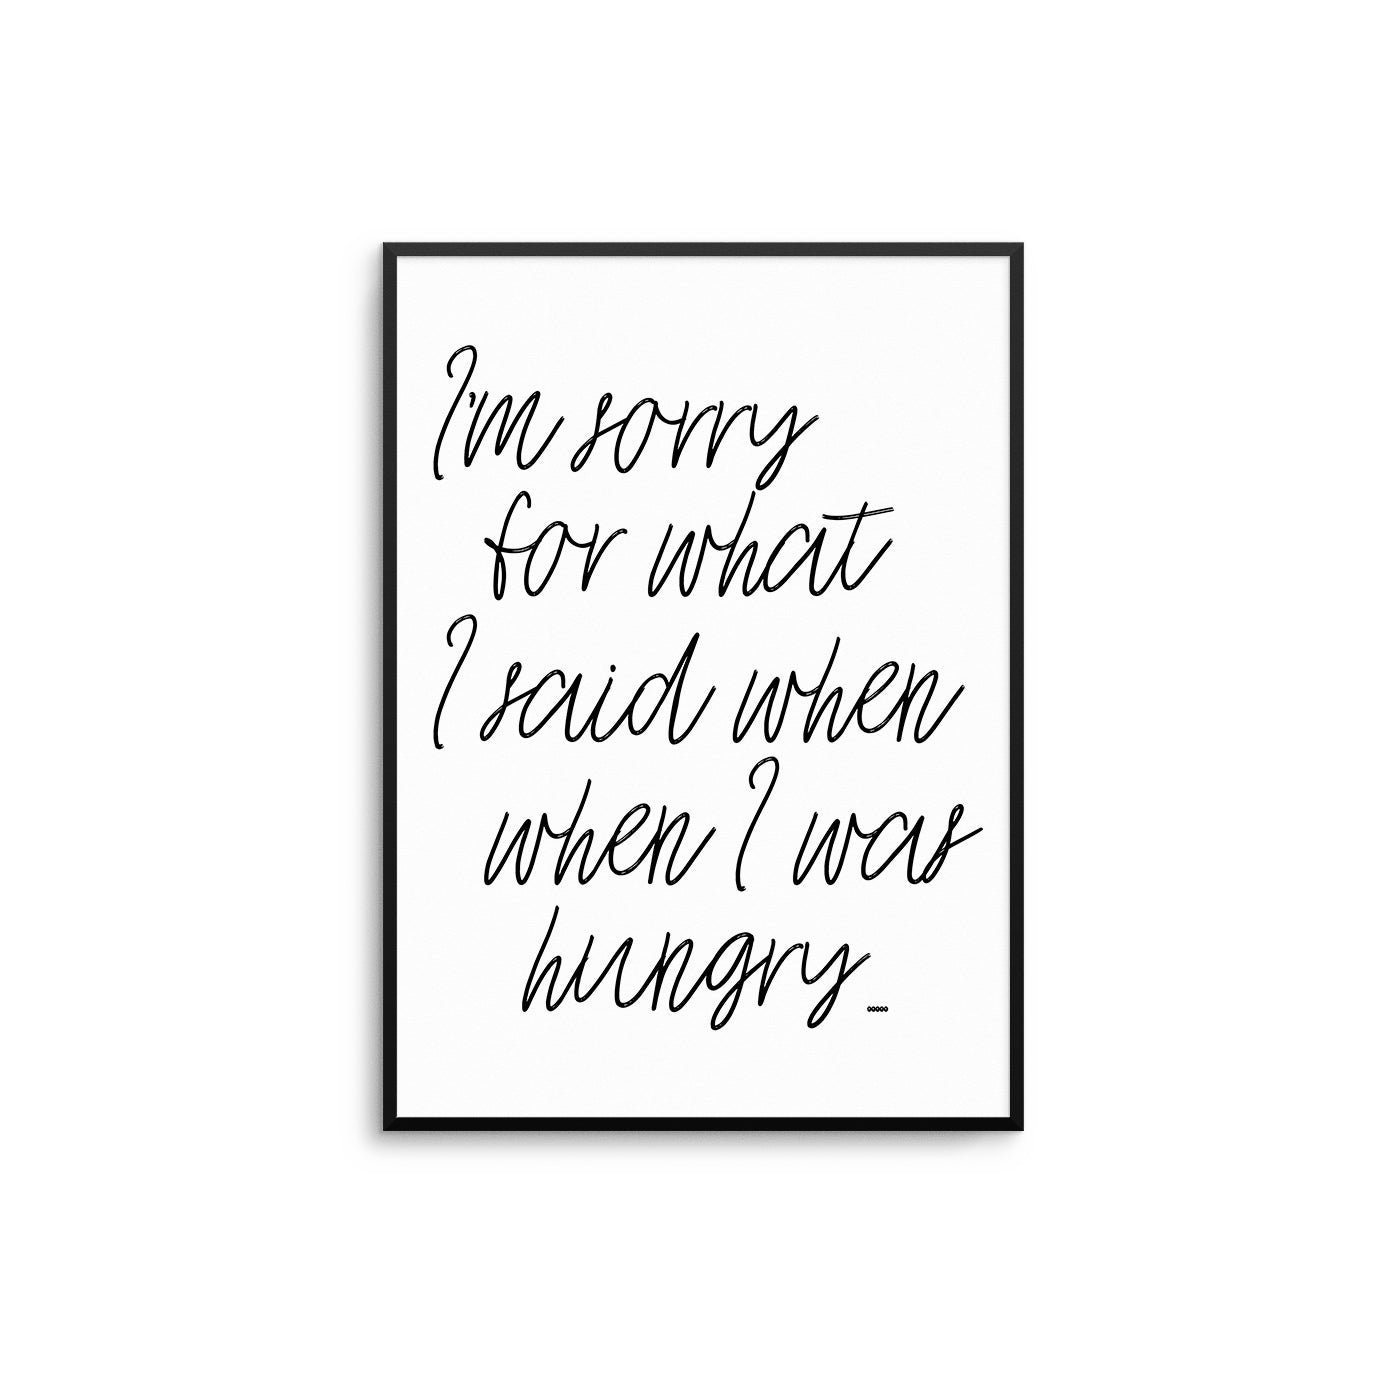 I'm Sorry For What I Said When I was Hungry II - D'Luxe Prints